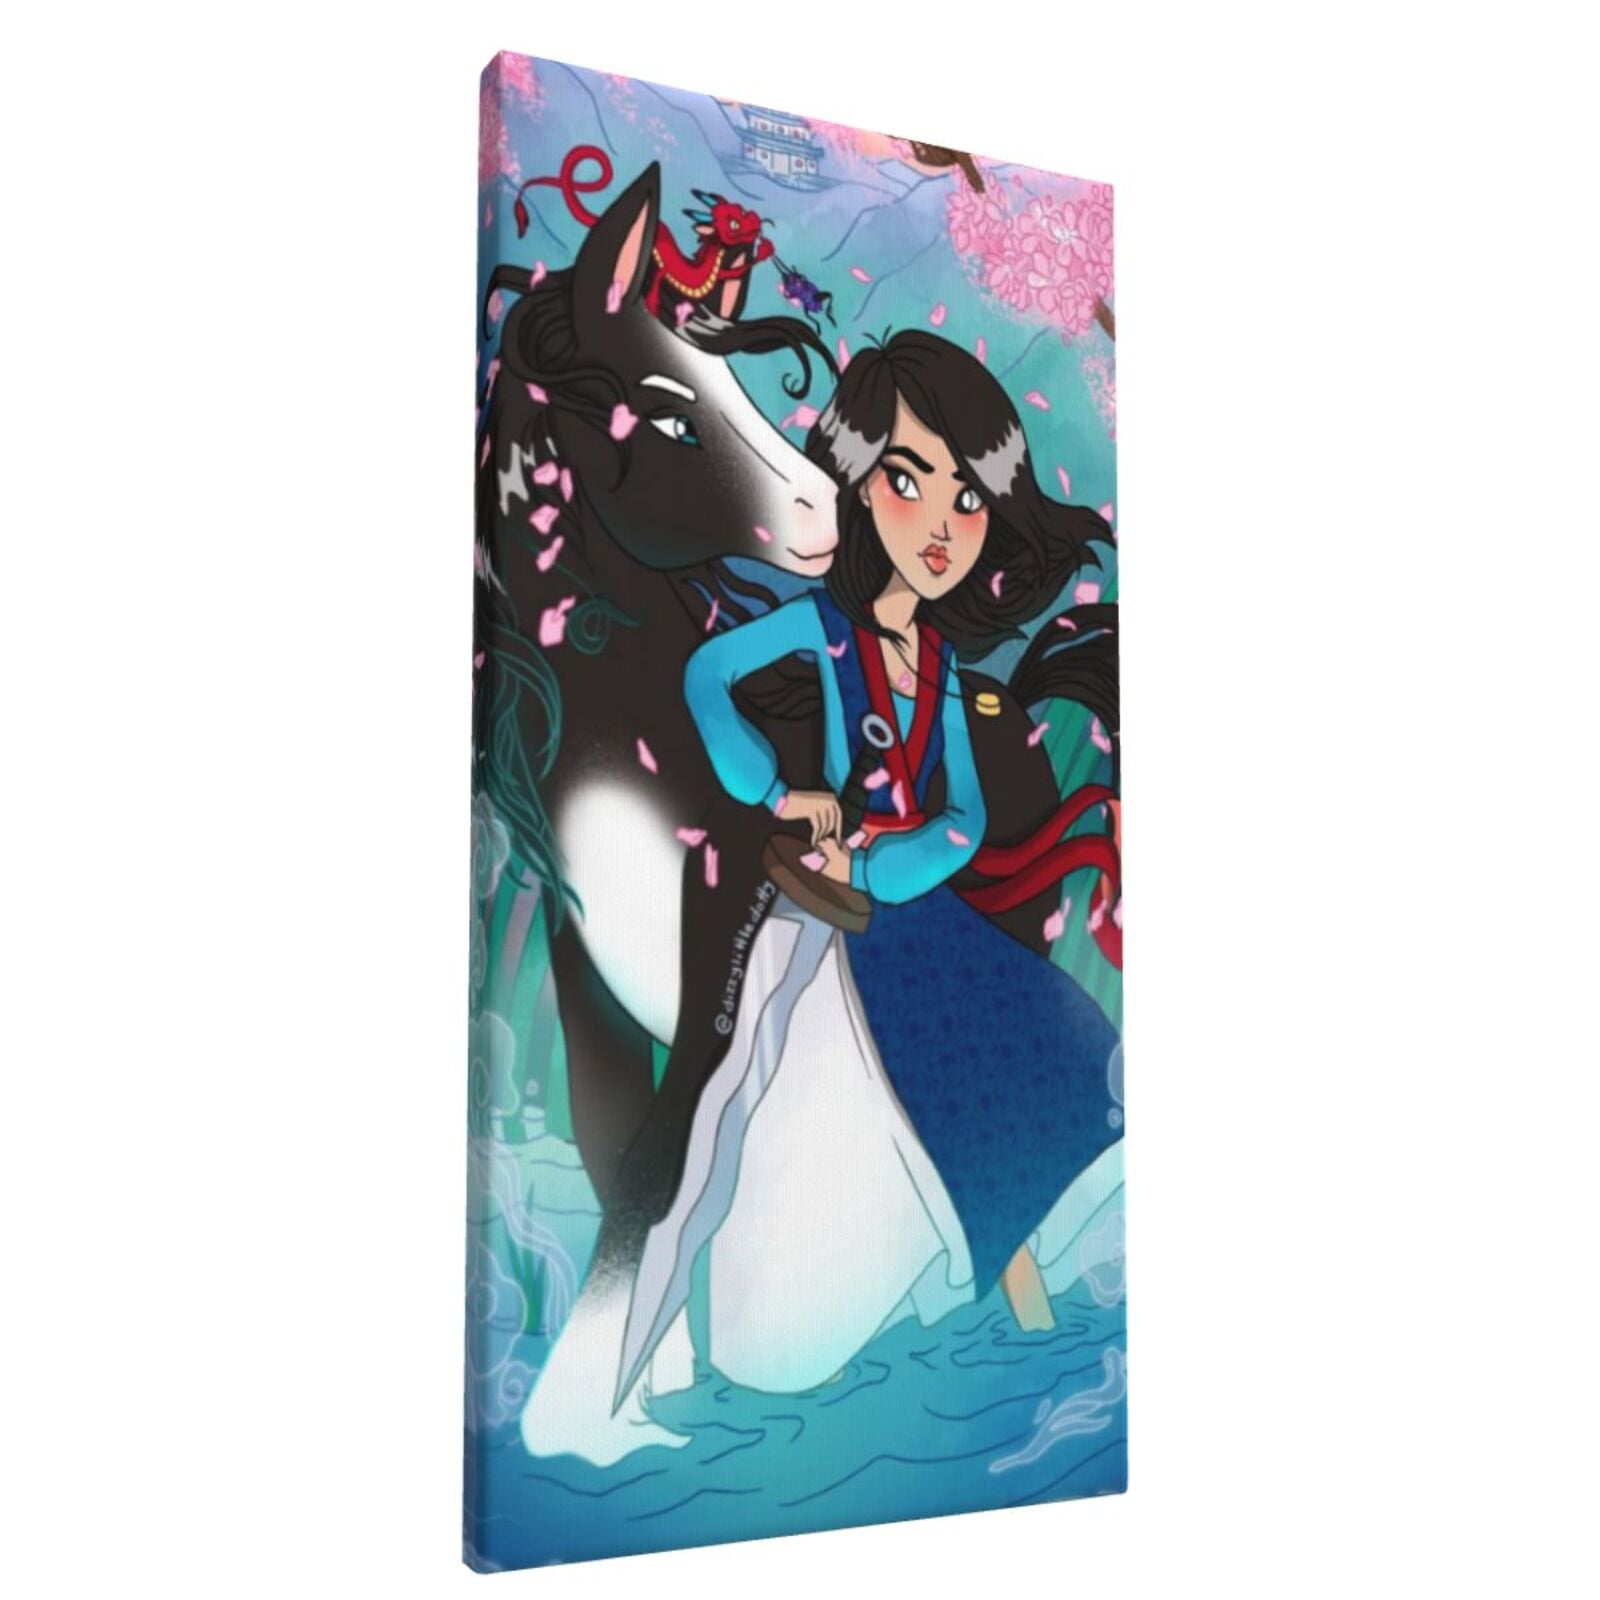 5"x7" or 7"x10" Disney Mulan Iron On Transfer for LIGHT-COLORED Fabric 